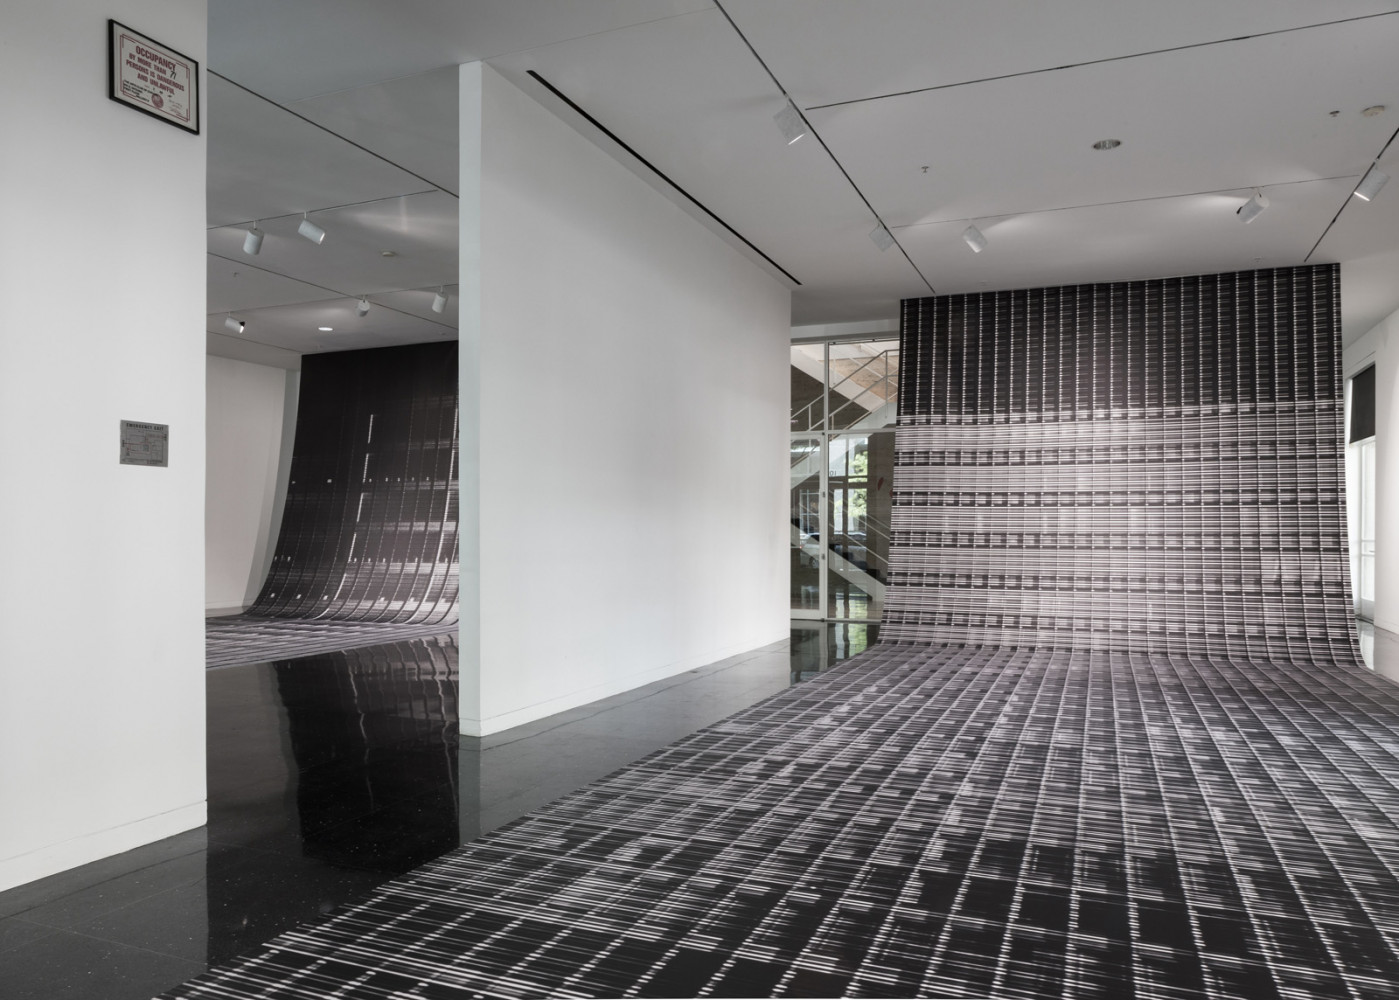 Bettina Pousttchi, ‘Suspended Mies, The Arts Club of Chicago’, Installation view, 2017